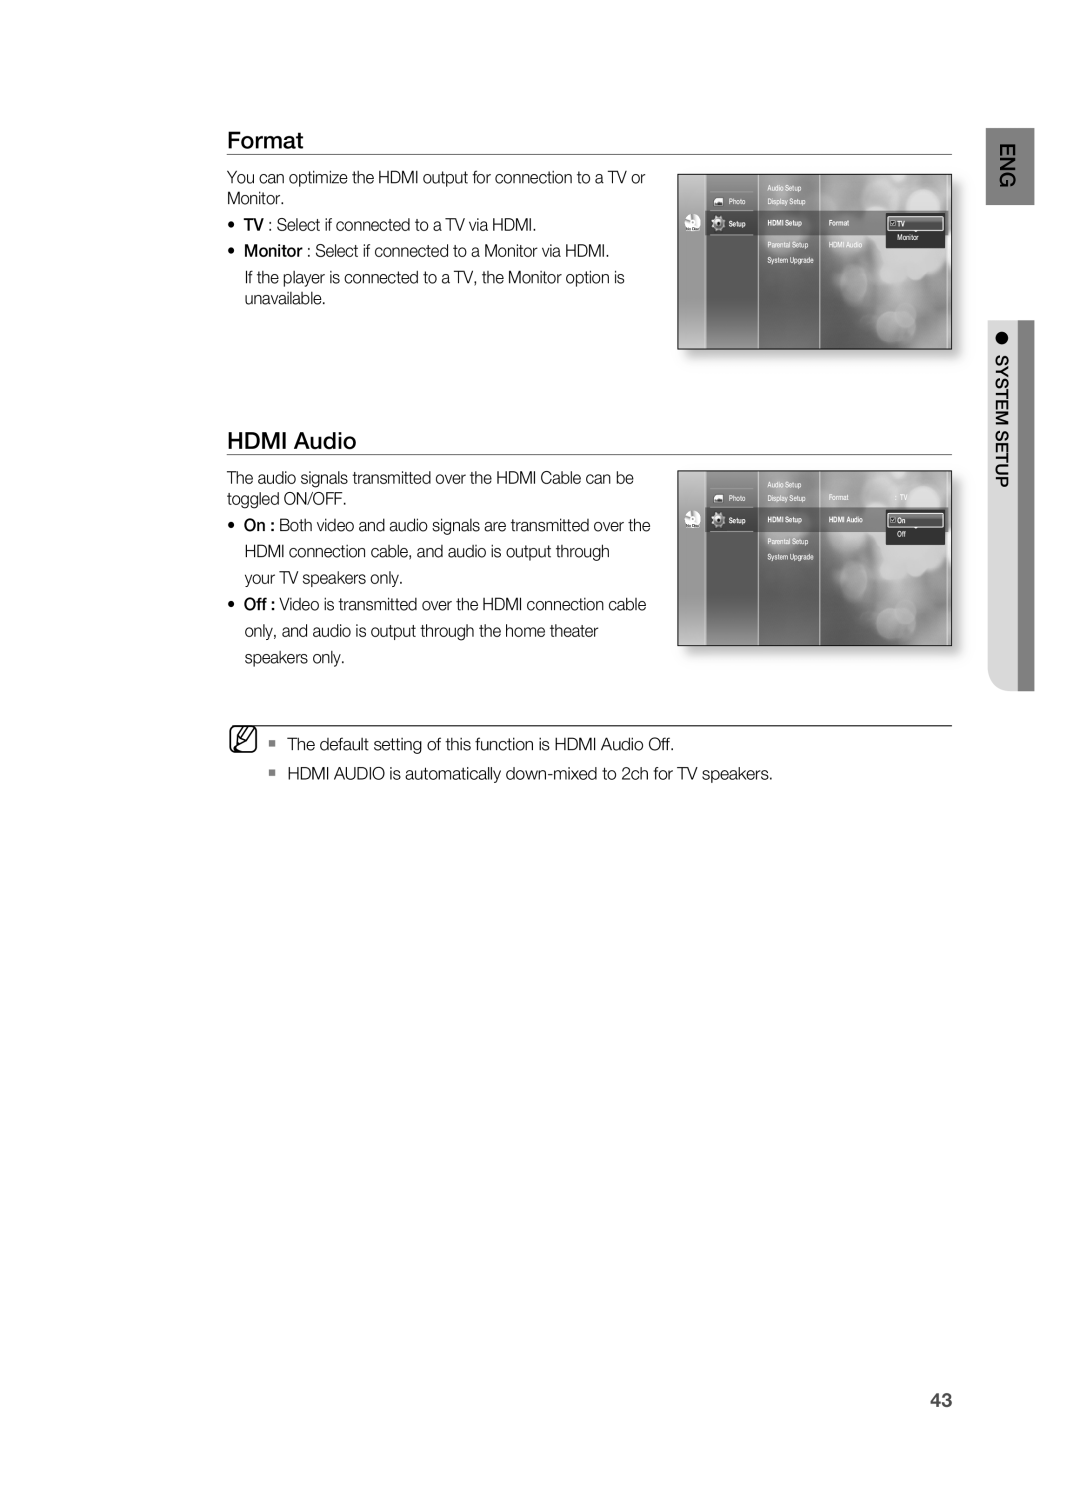 Samsung HT-BD2 manual Format, HDMI Audio, Monitor, TV : Select if connected to a TV via HDMI, unavailable, System, Setup 